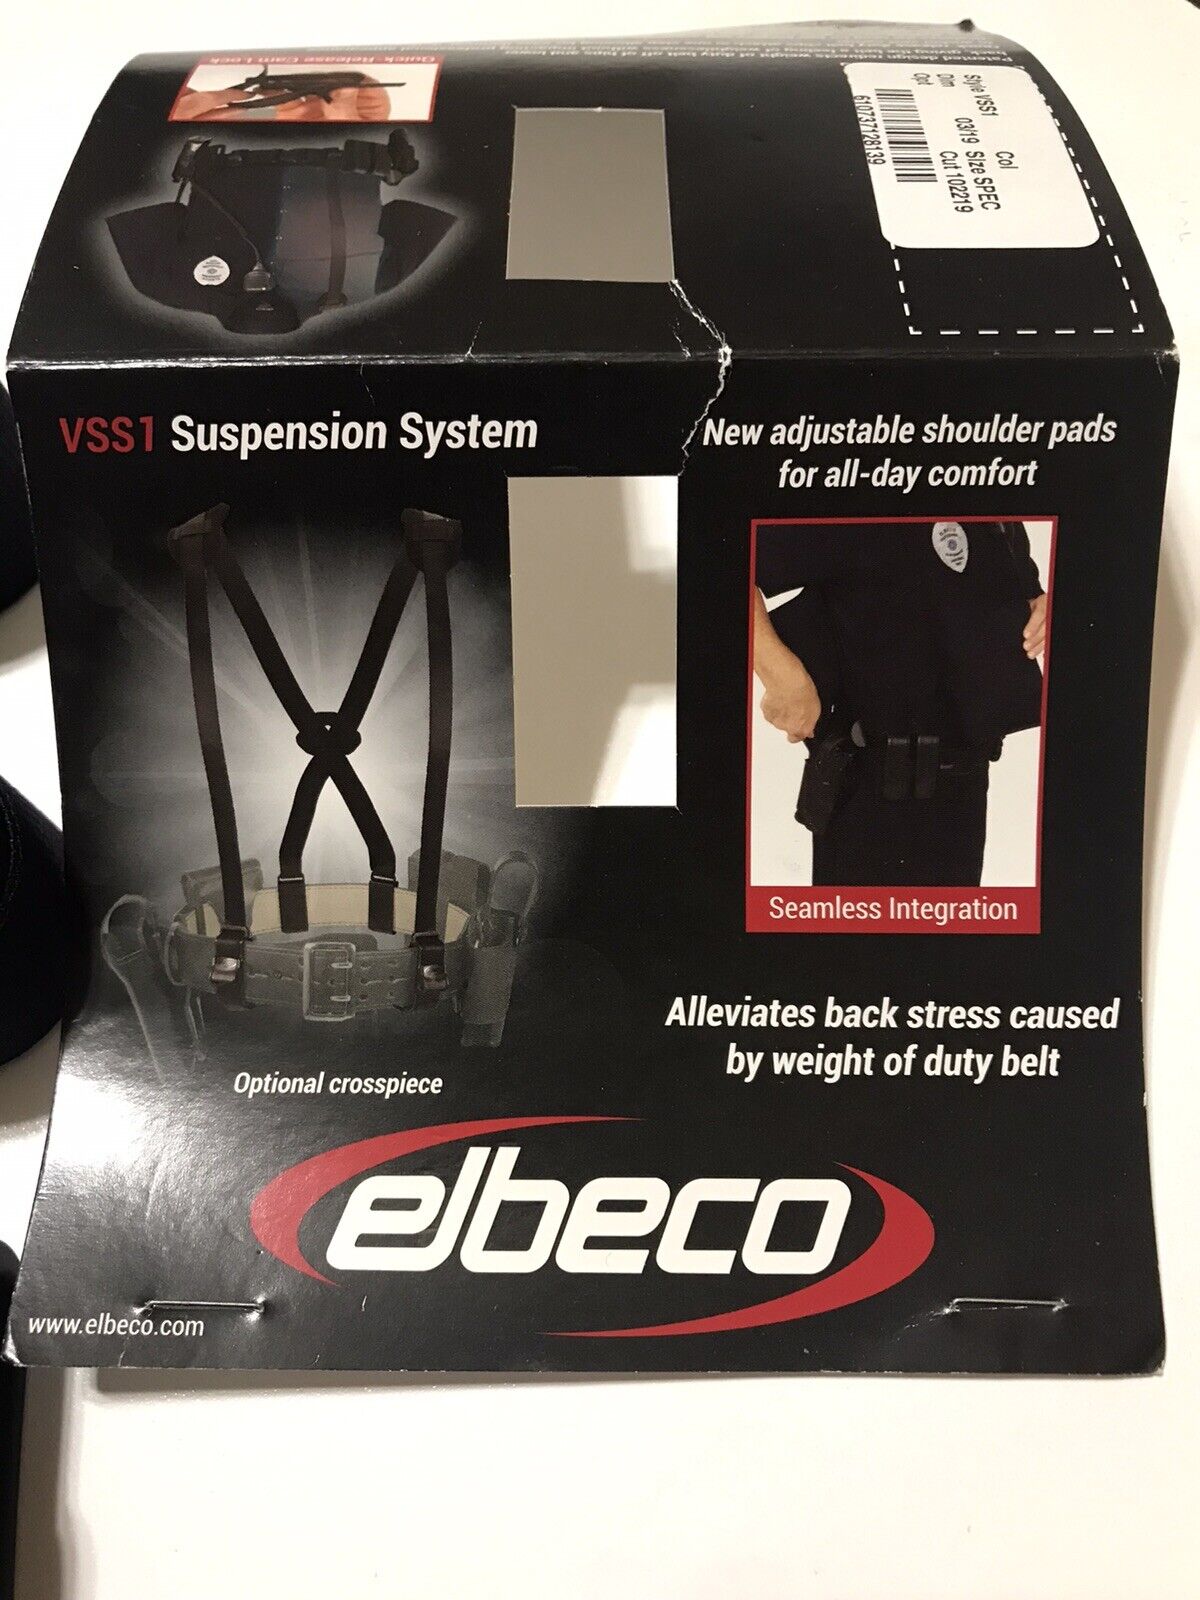 Elbeco Free shipping anywhere in the nation VSS1 gift suport system